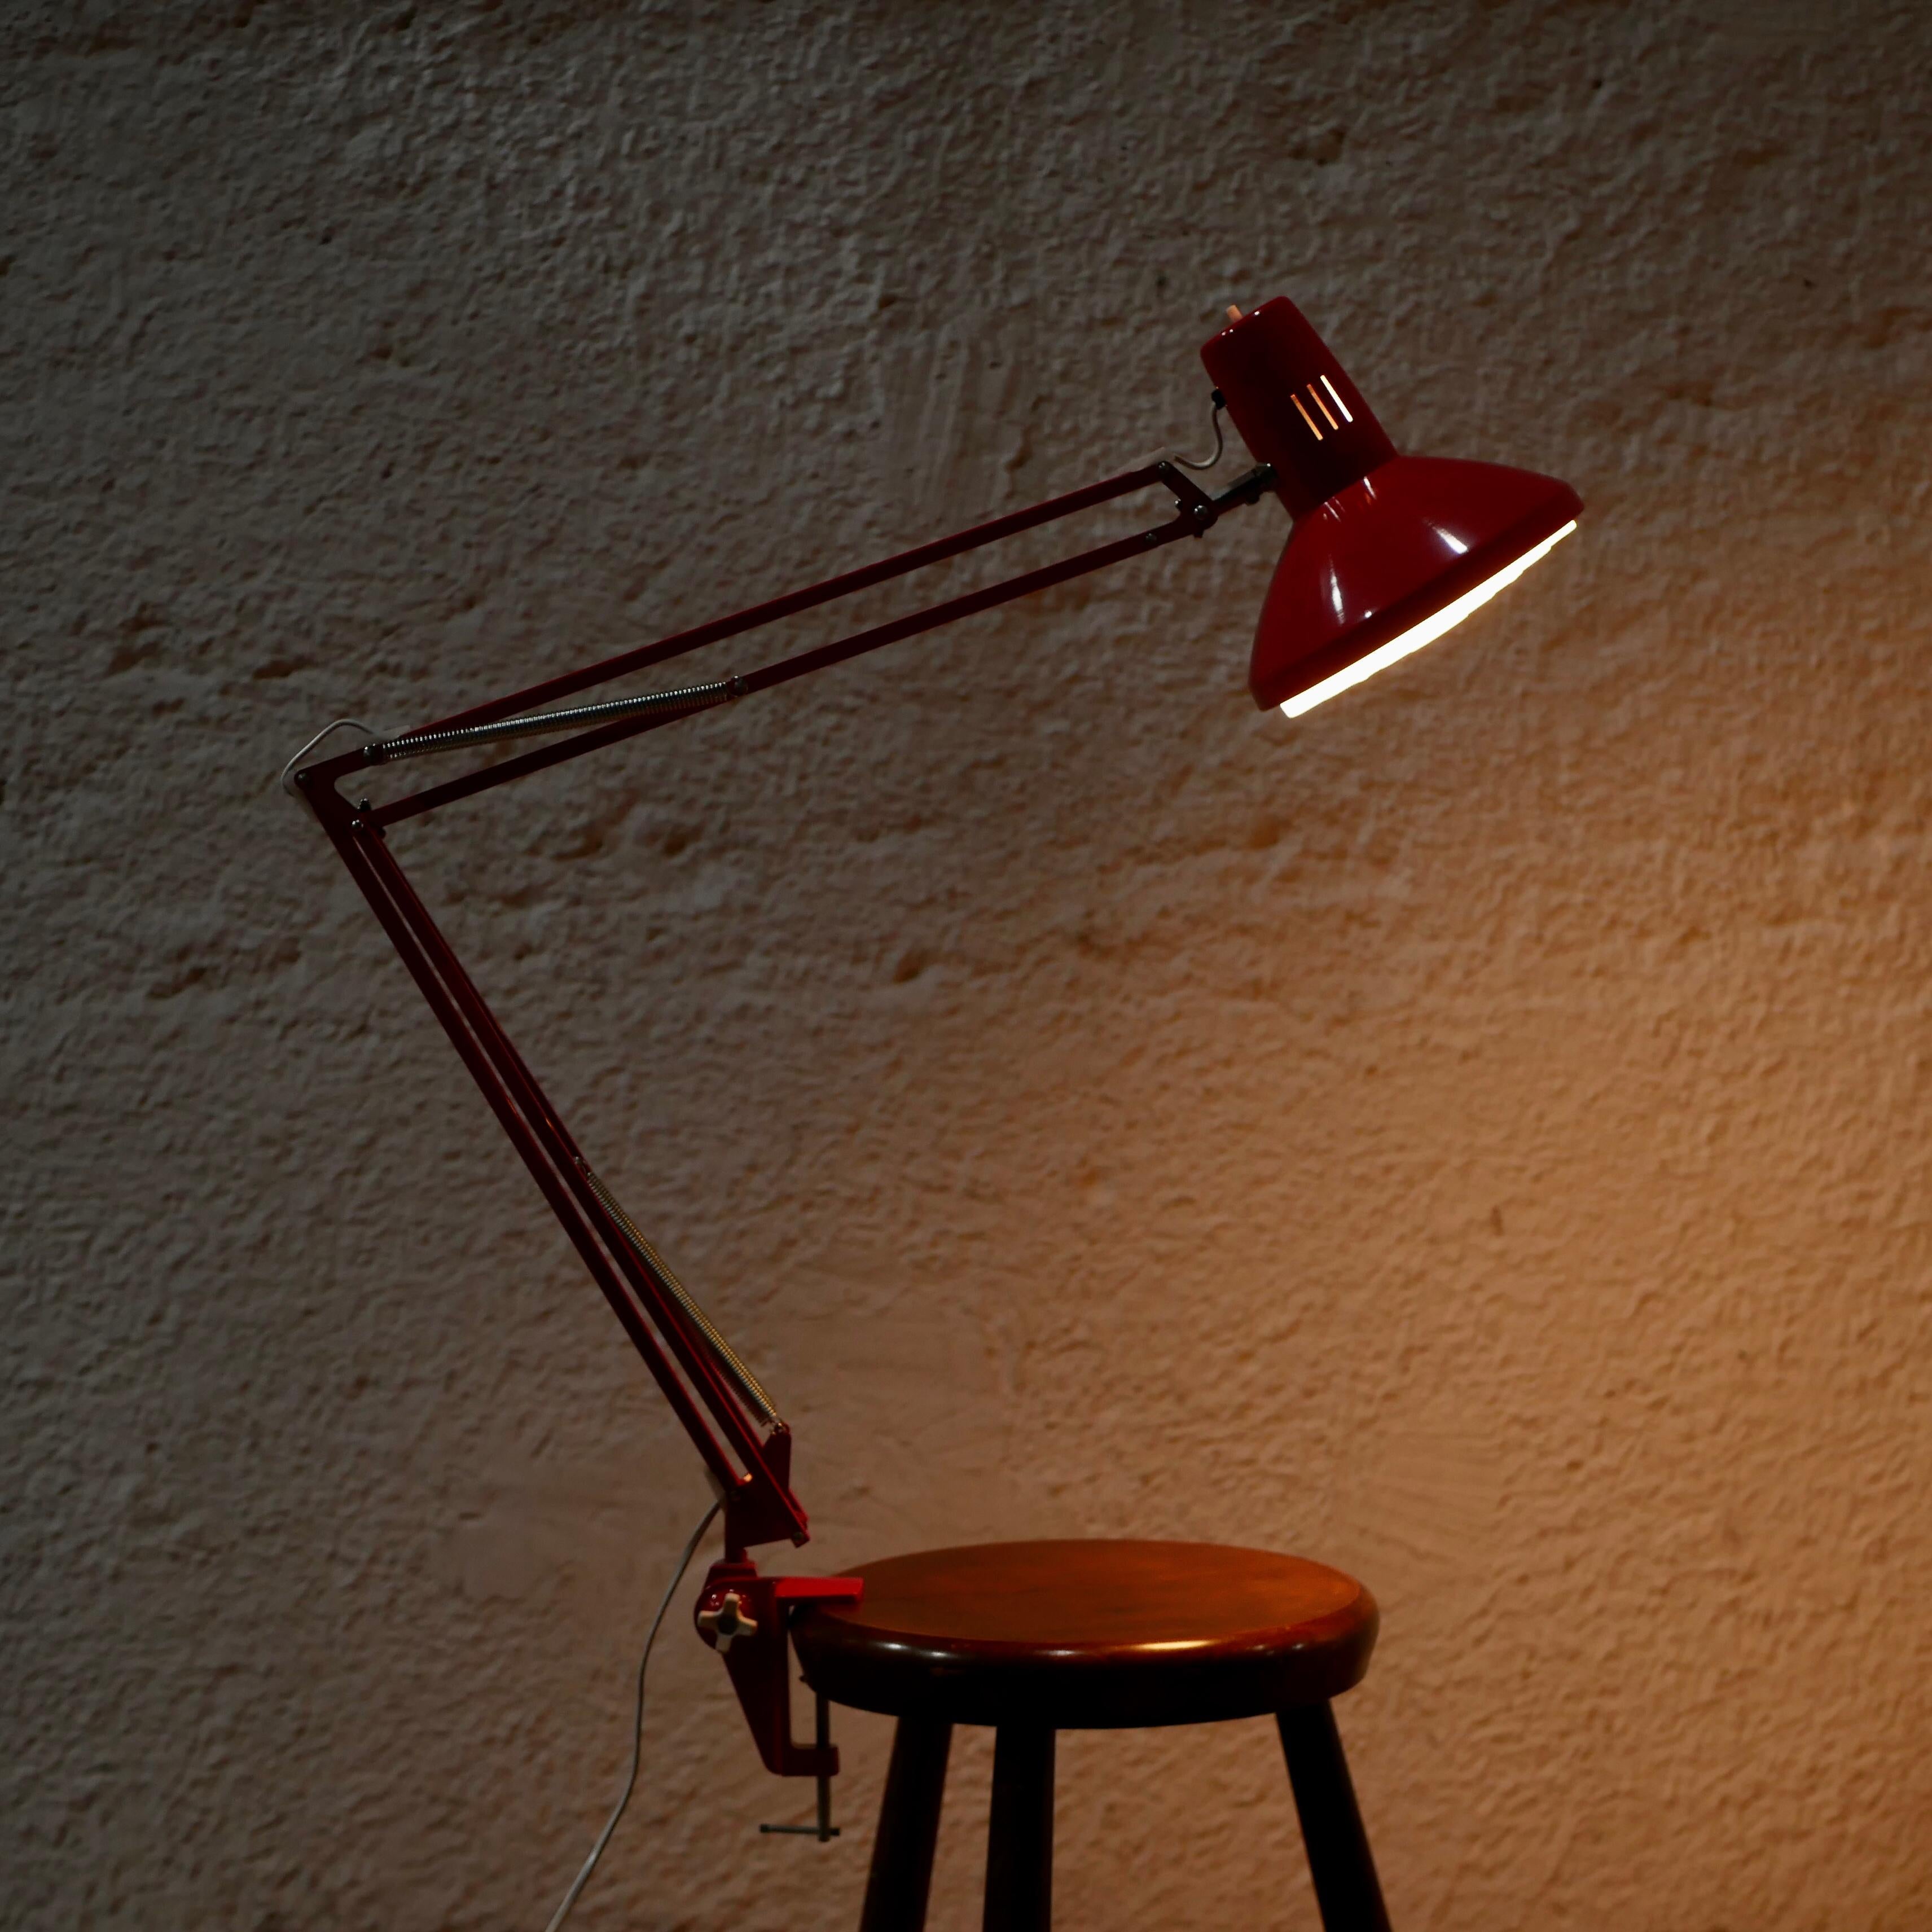 Metal Red Articulated Desk Lamp by Ledu, Made in, France